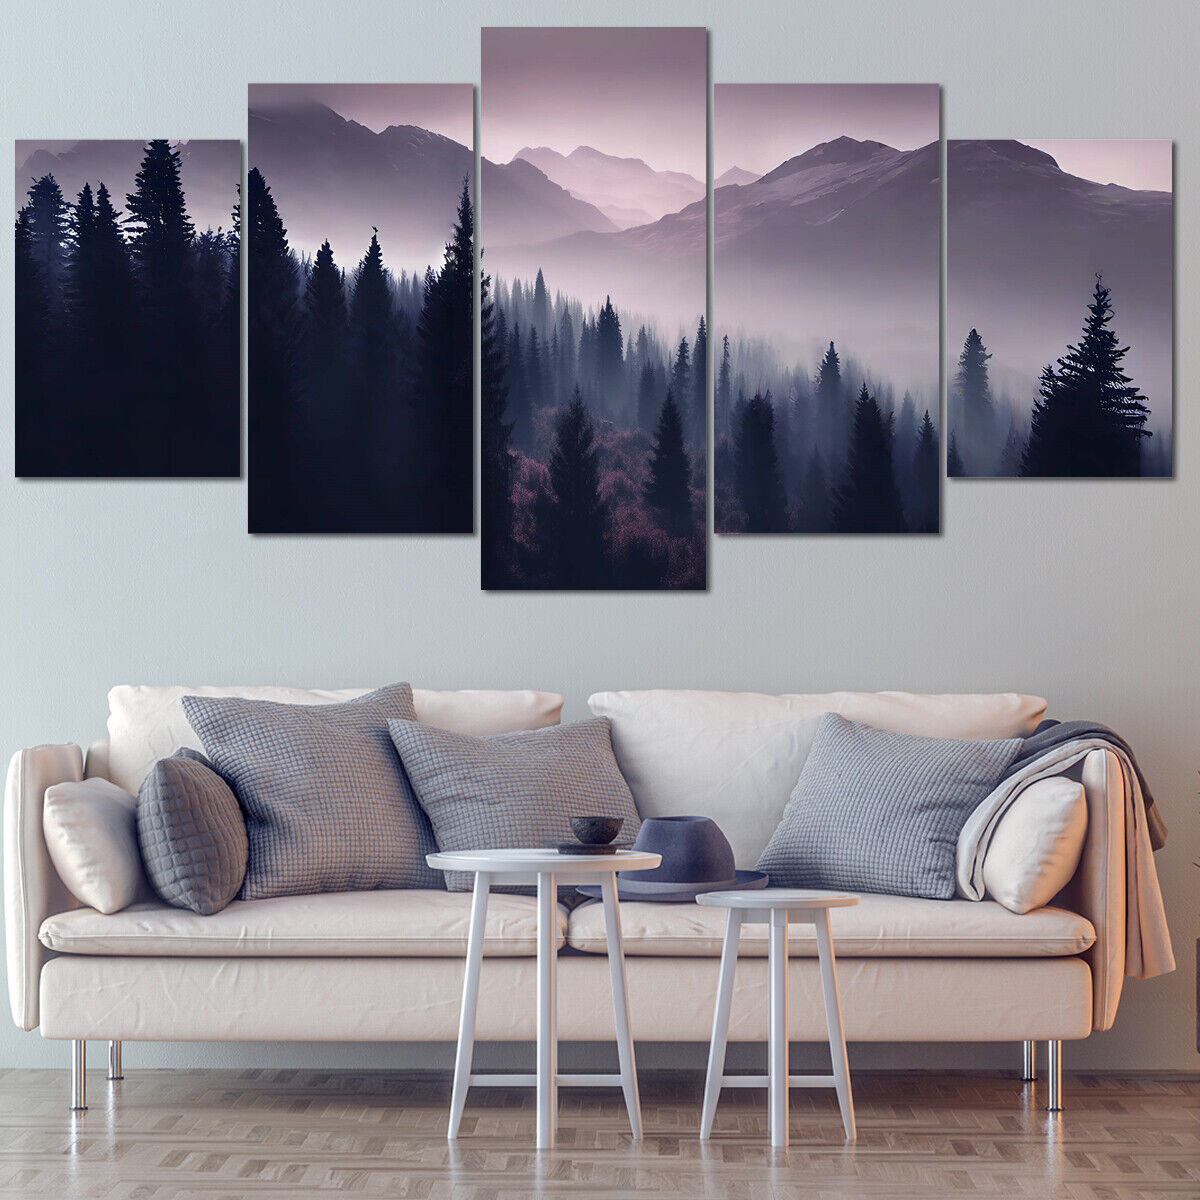 Primary image for 5 Pieces Canvas Wall Art Poster Print Modern Mountain Forest Painting Home Decor